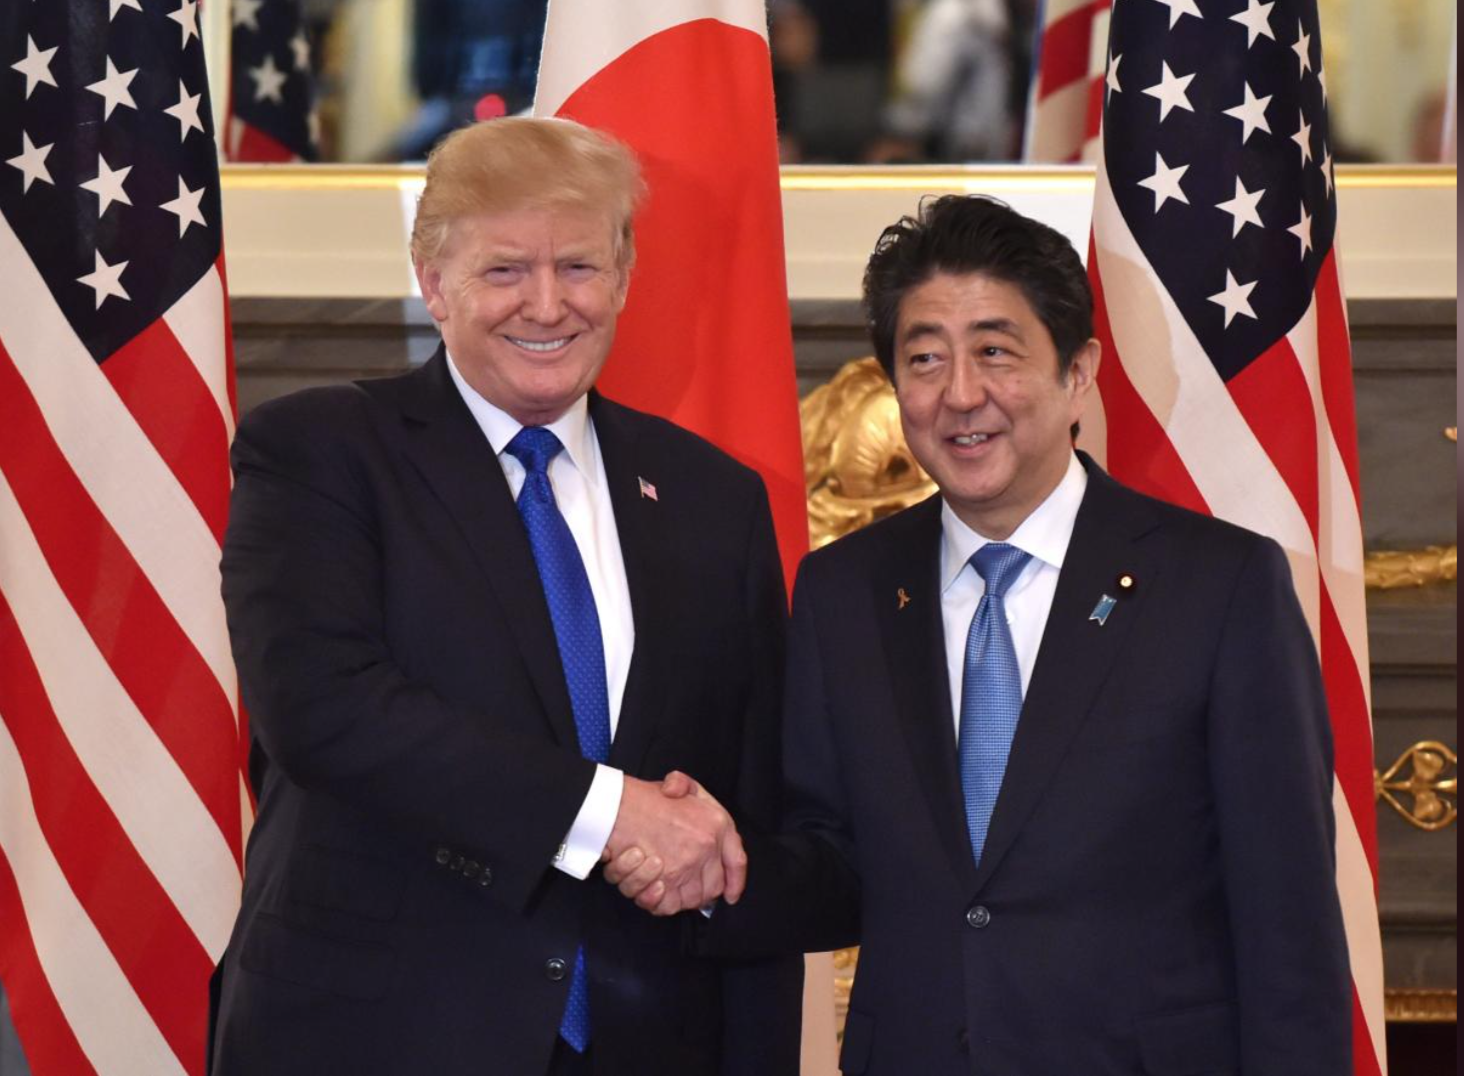 President Trump Says He Stands With Japan On Trade